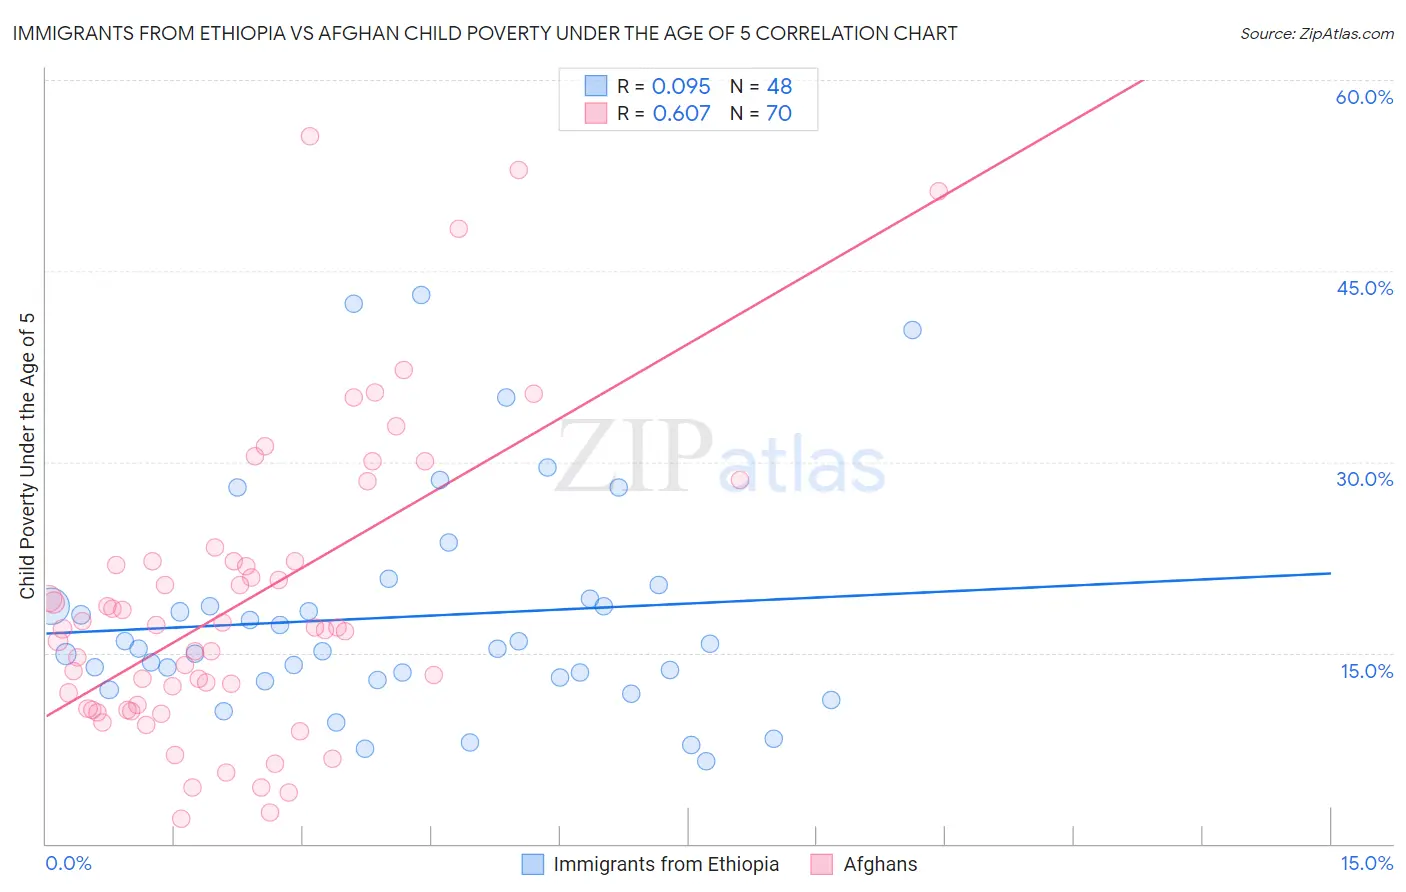 Immigrants from Ethiopia vs Afghan Child Poverty Under the Age of 5